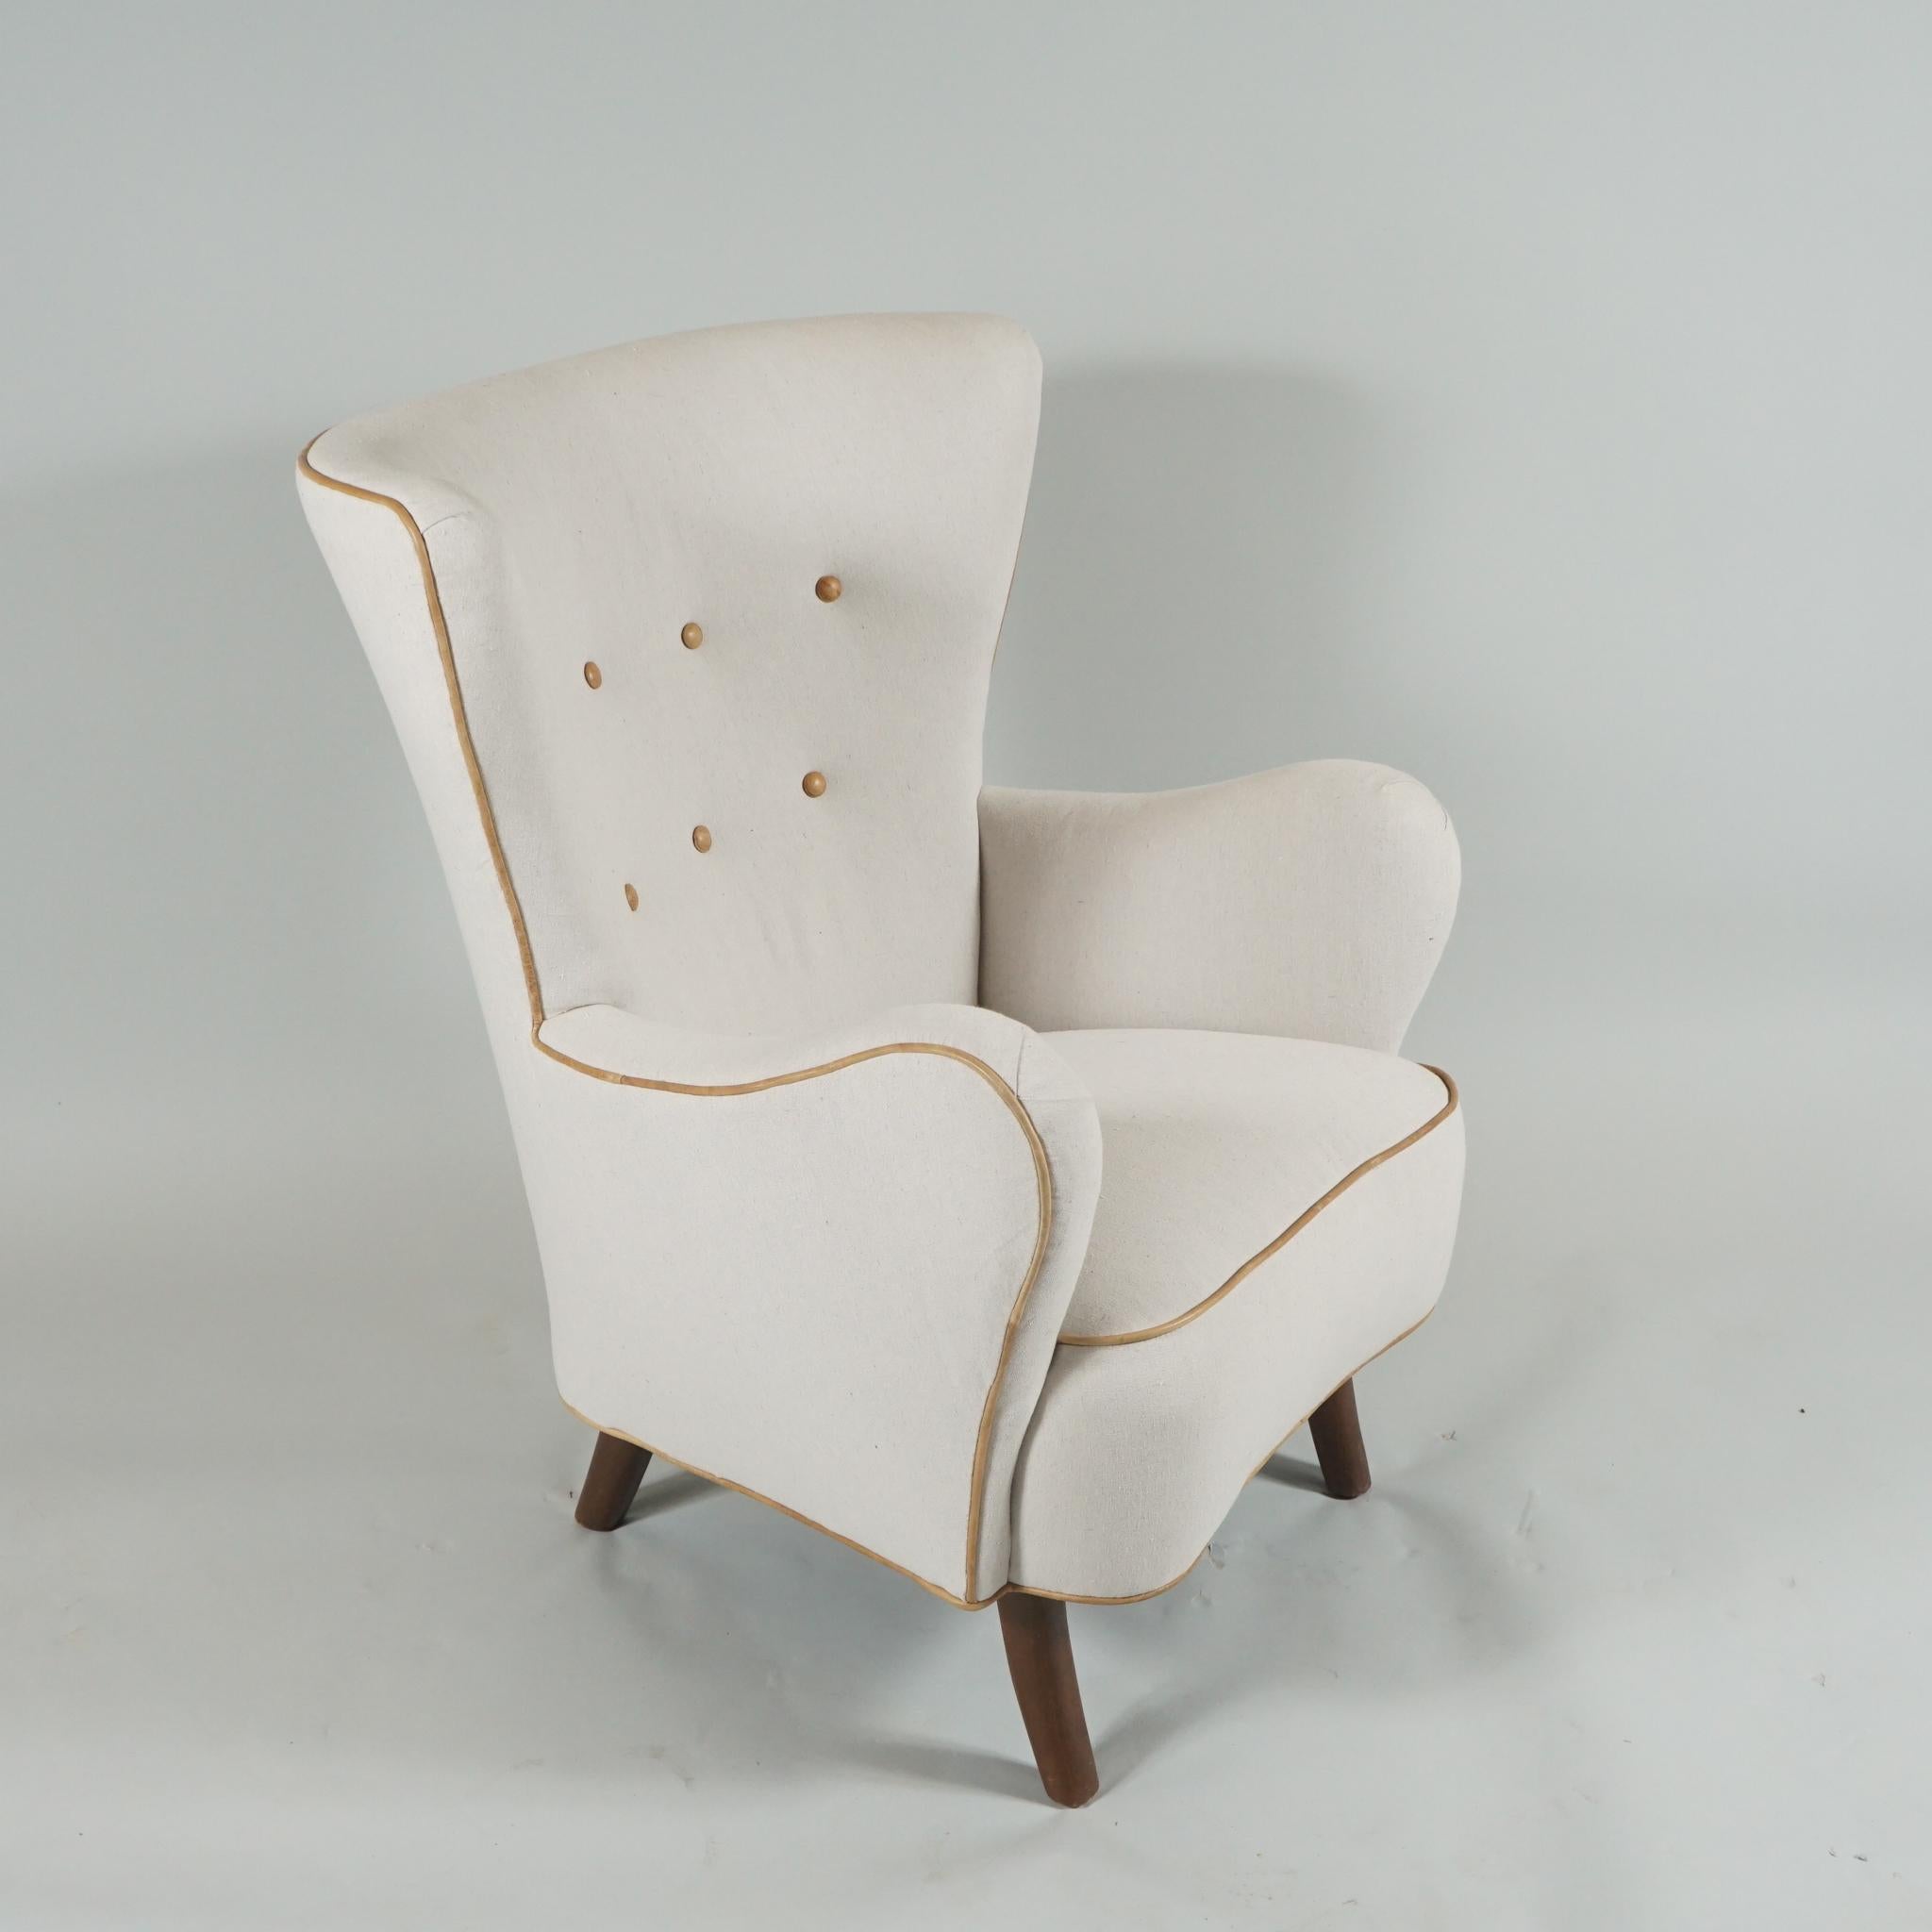 Danish modern upholstered wingback armchair by Danish designer, Alfred Christensen, re-covered in off-white
cotton with buttoned back and piping in beige leather. The generously curved arms and graceful
legs are a signature of this designer.